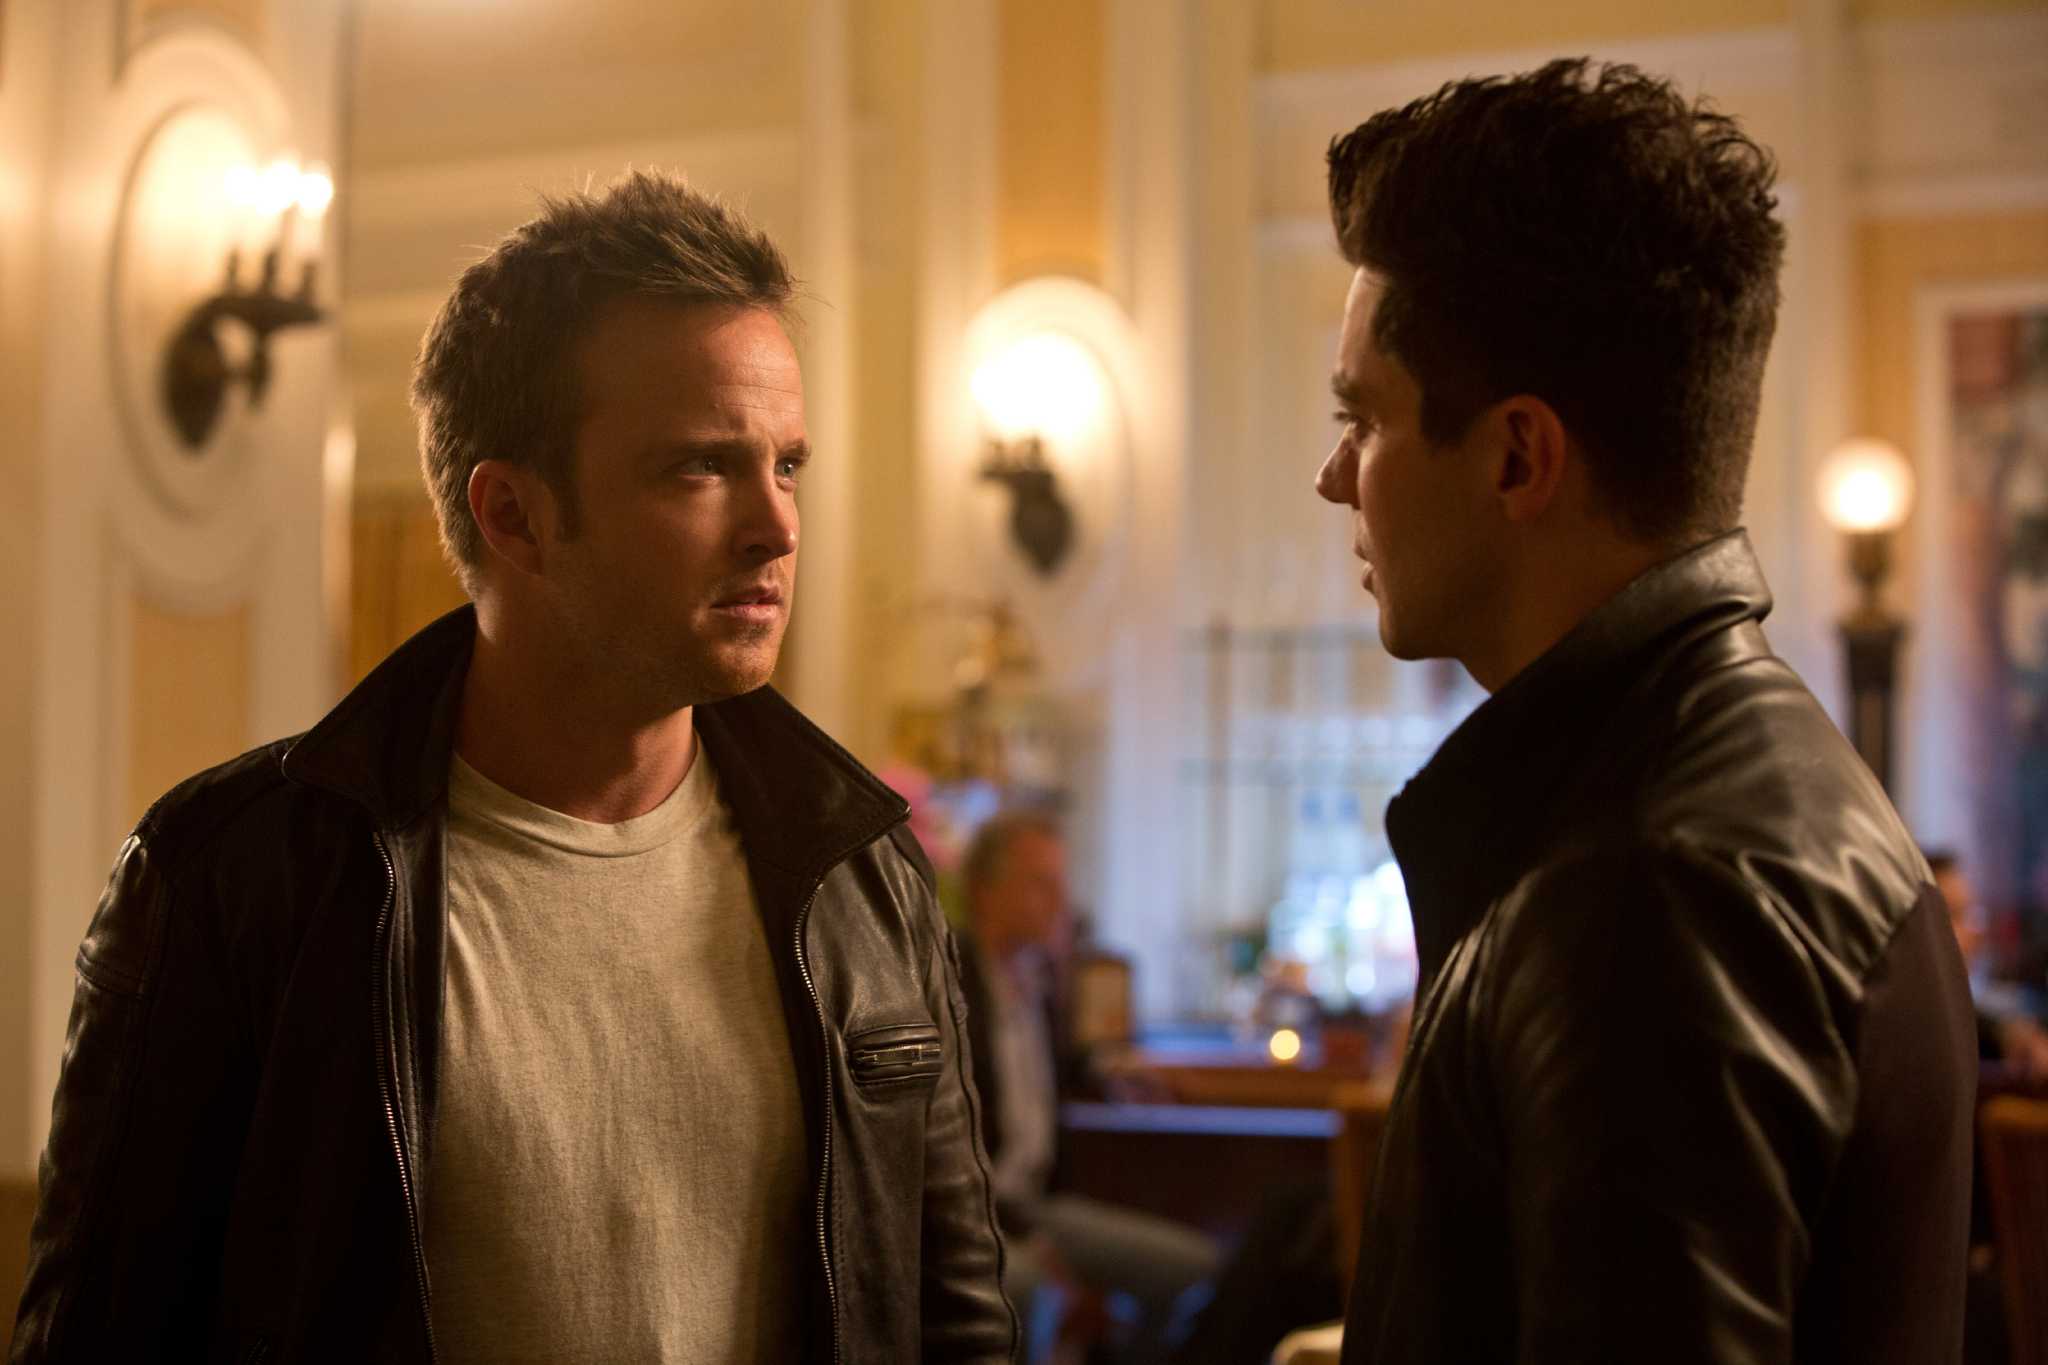 Tobey Marshall (Aaron Paul, center) with Benny (Scott Mescudi, left) and  Joe Peck (Ramon Rodriguez) are featured in this scene in DreamWorks  Pictures' Need for Speed, an exciting return to the great